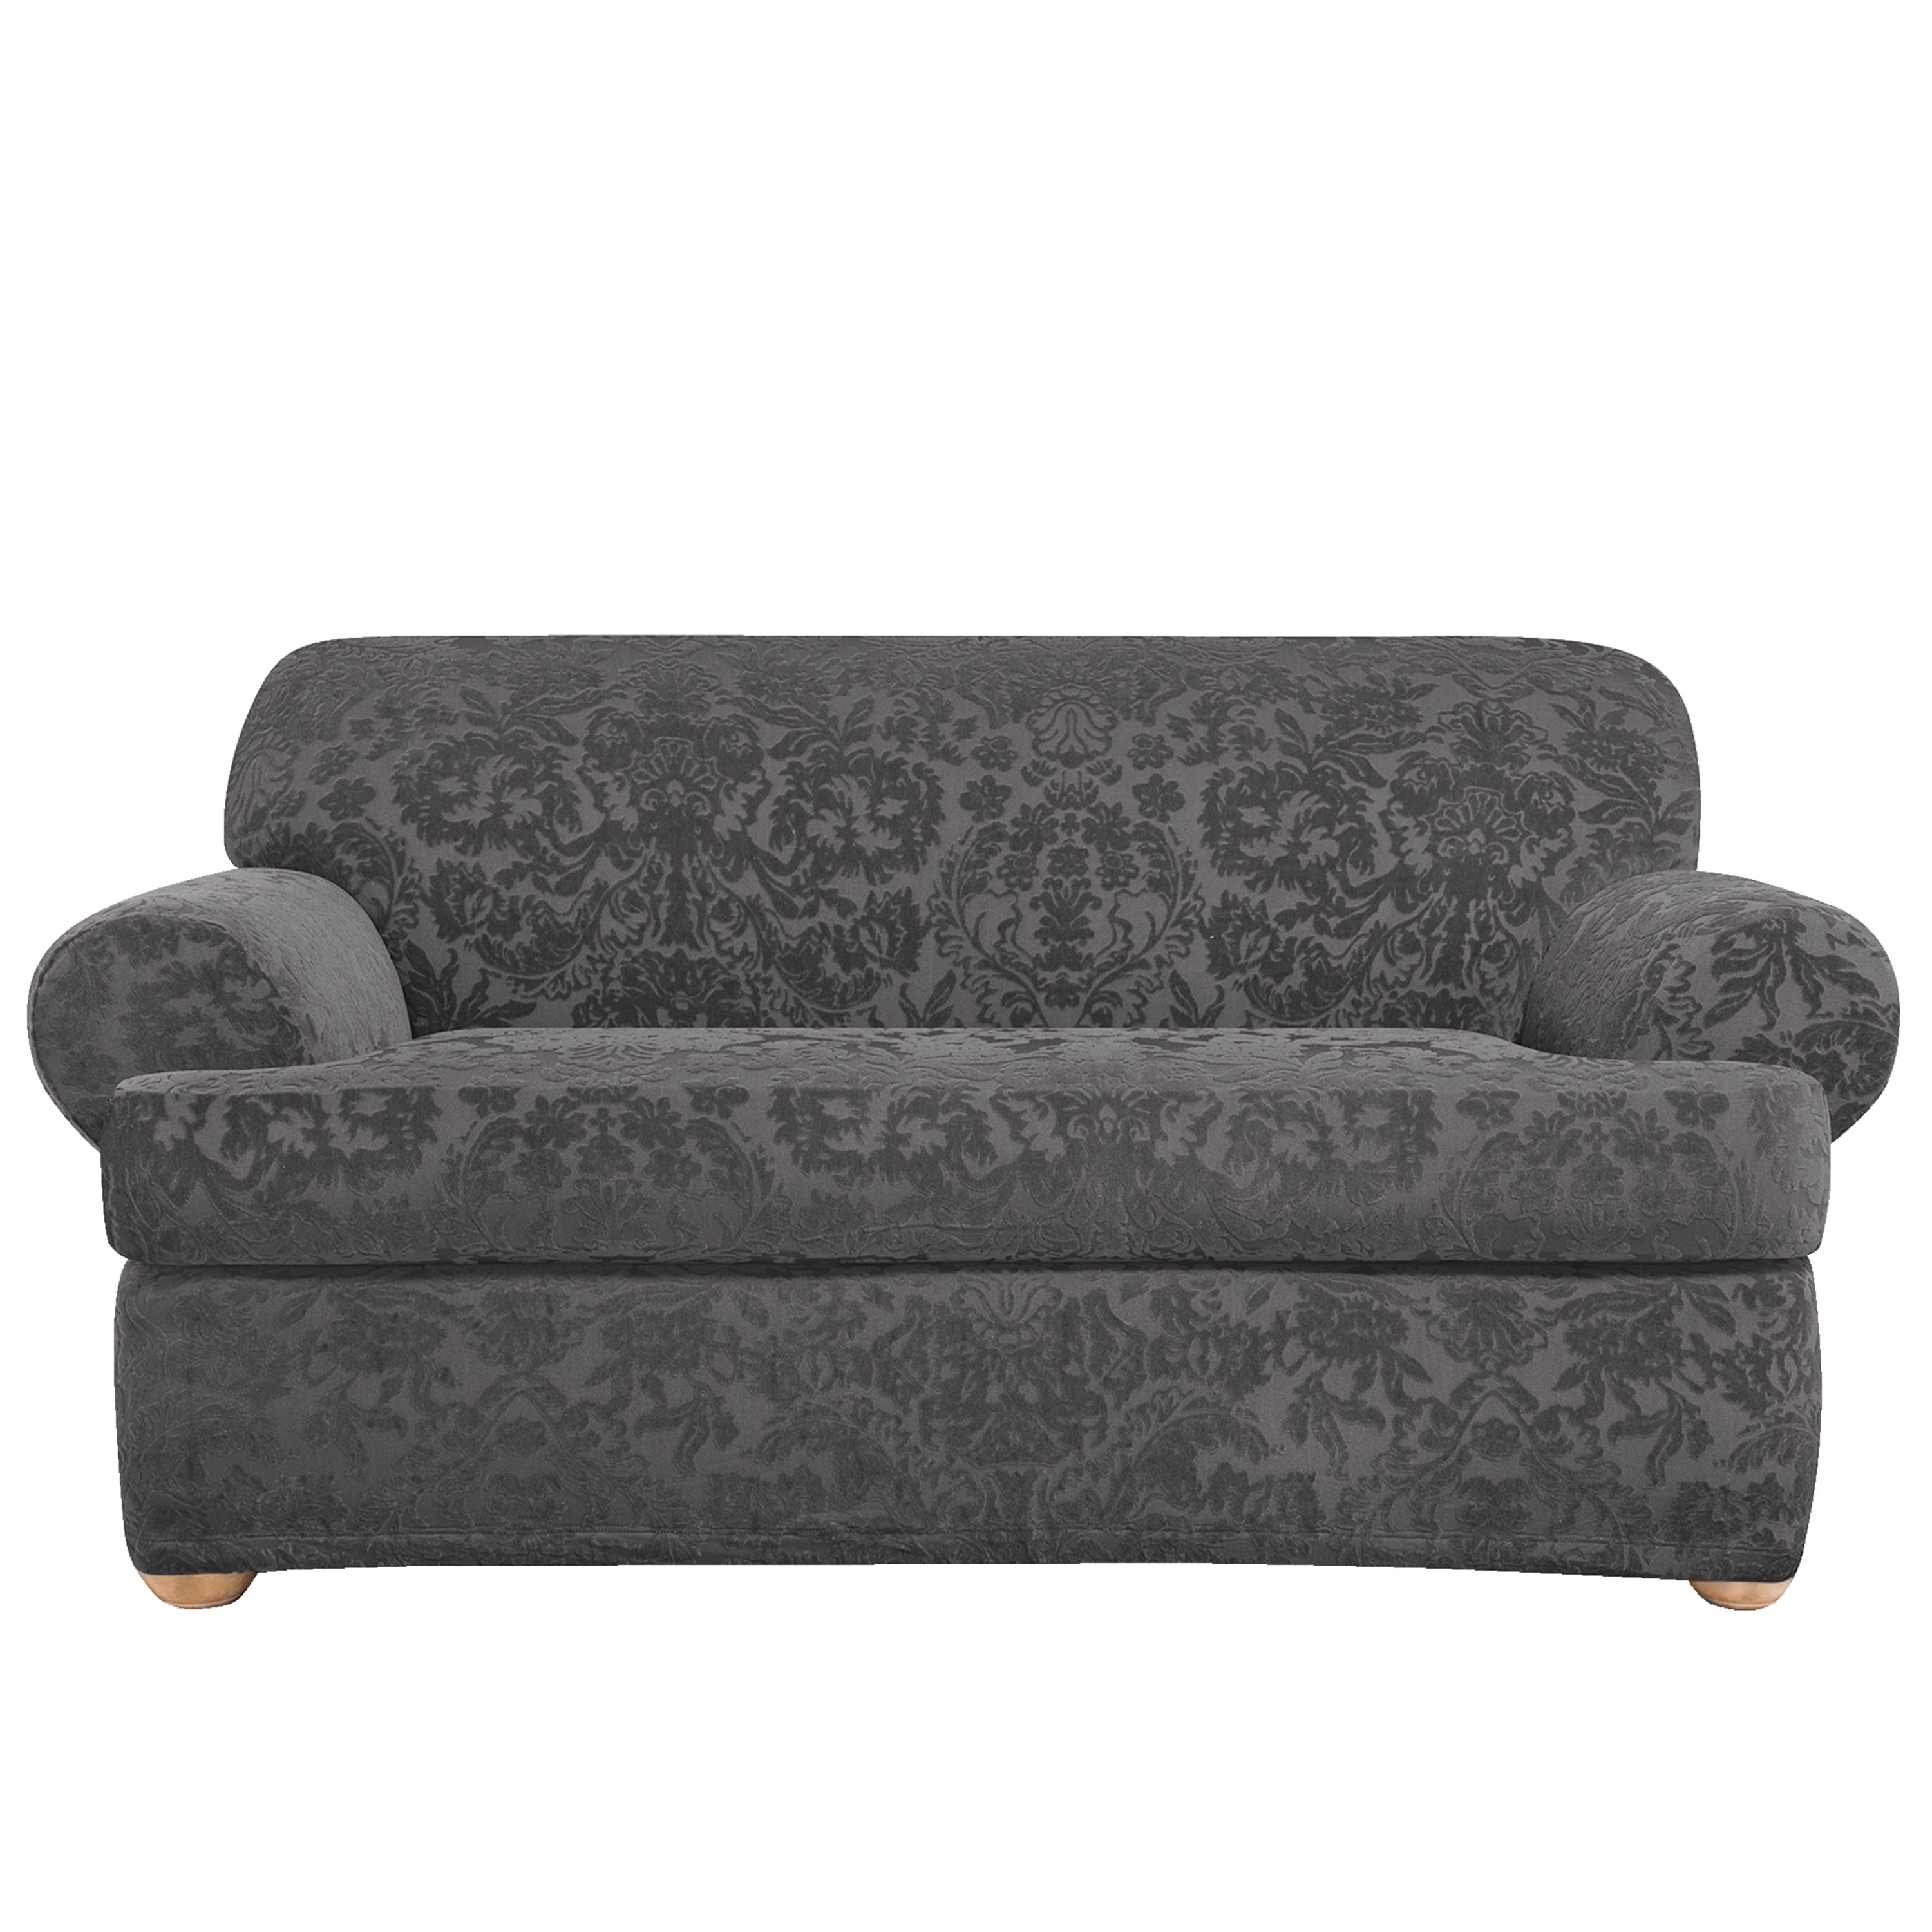 Sure Fit Stretch Jacquard Damask T-Cushion Loveseat Slipcover